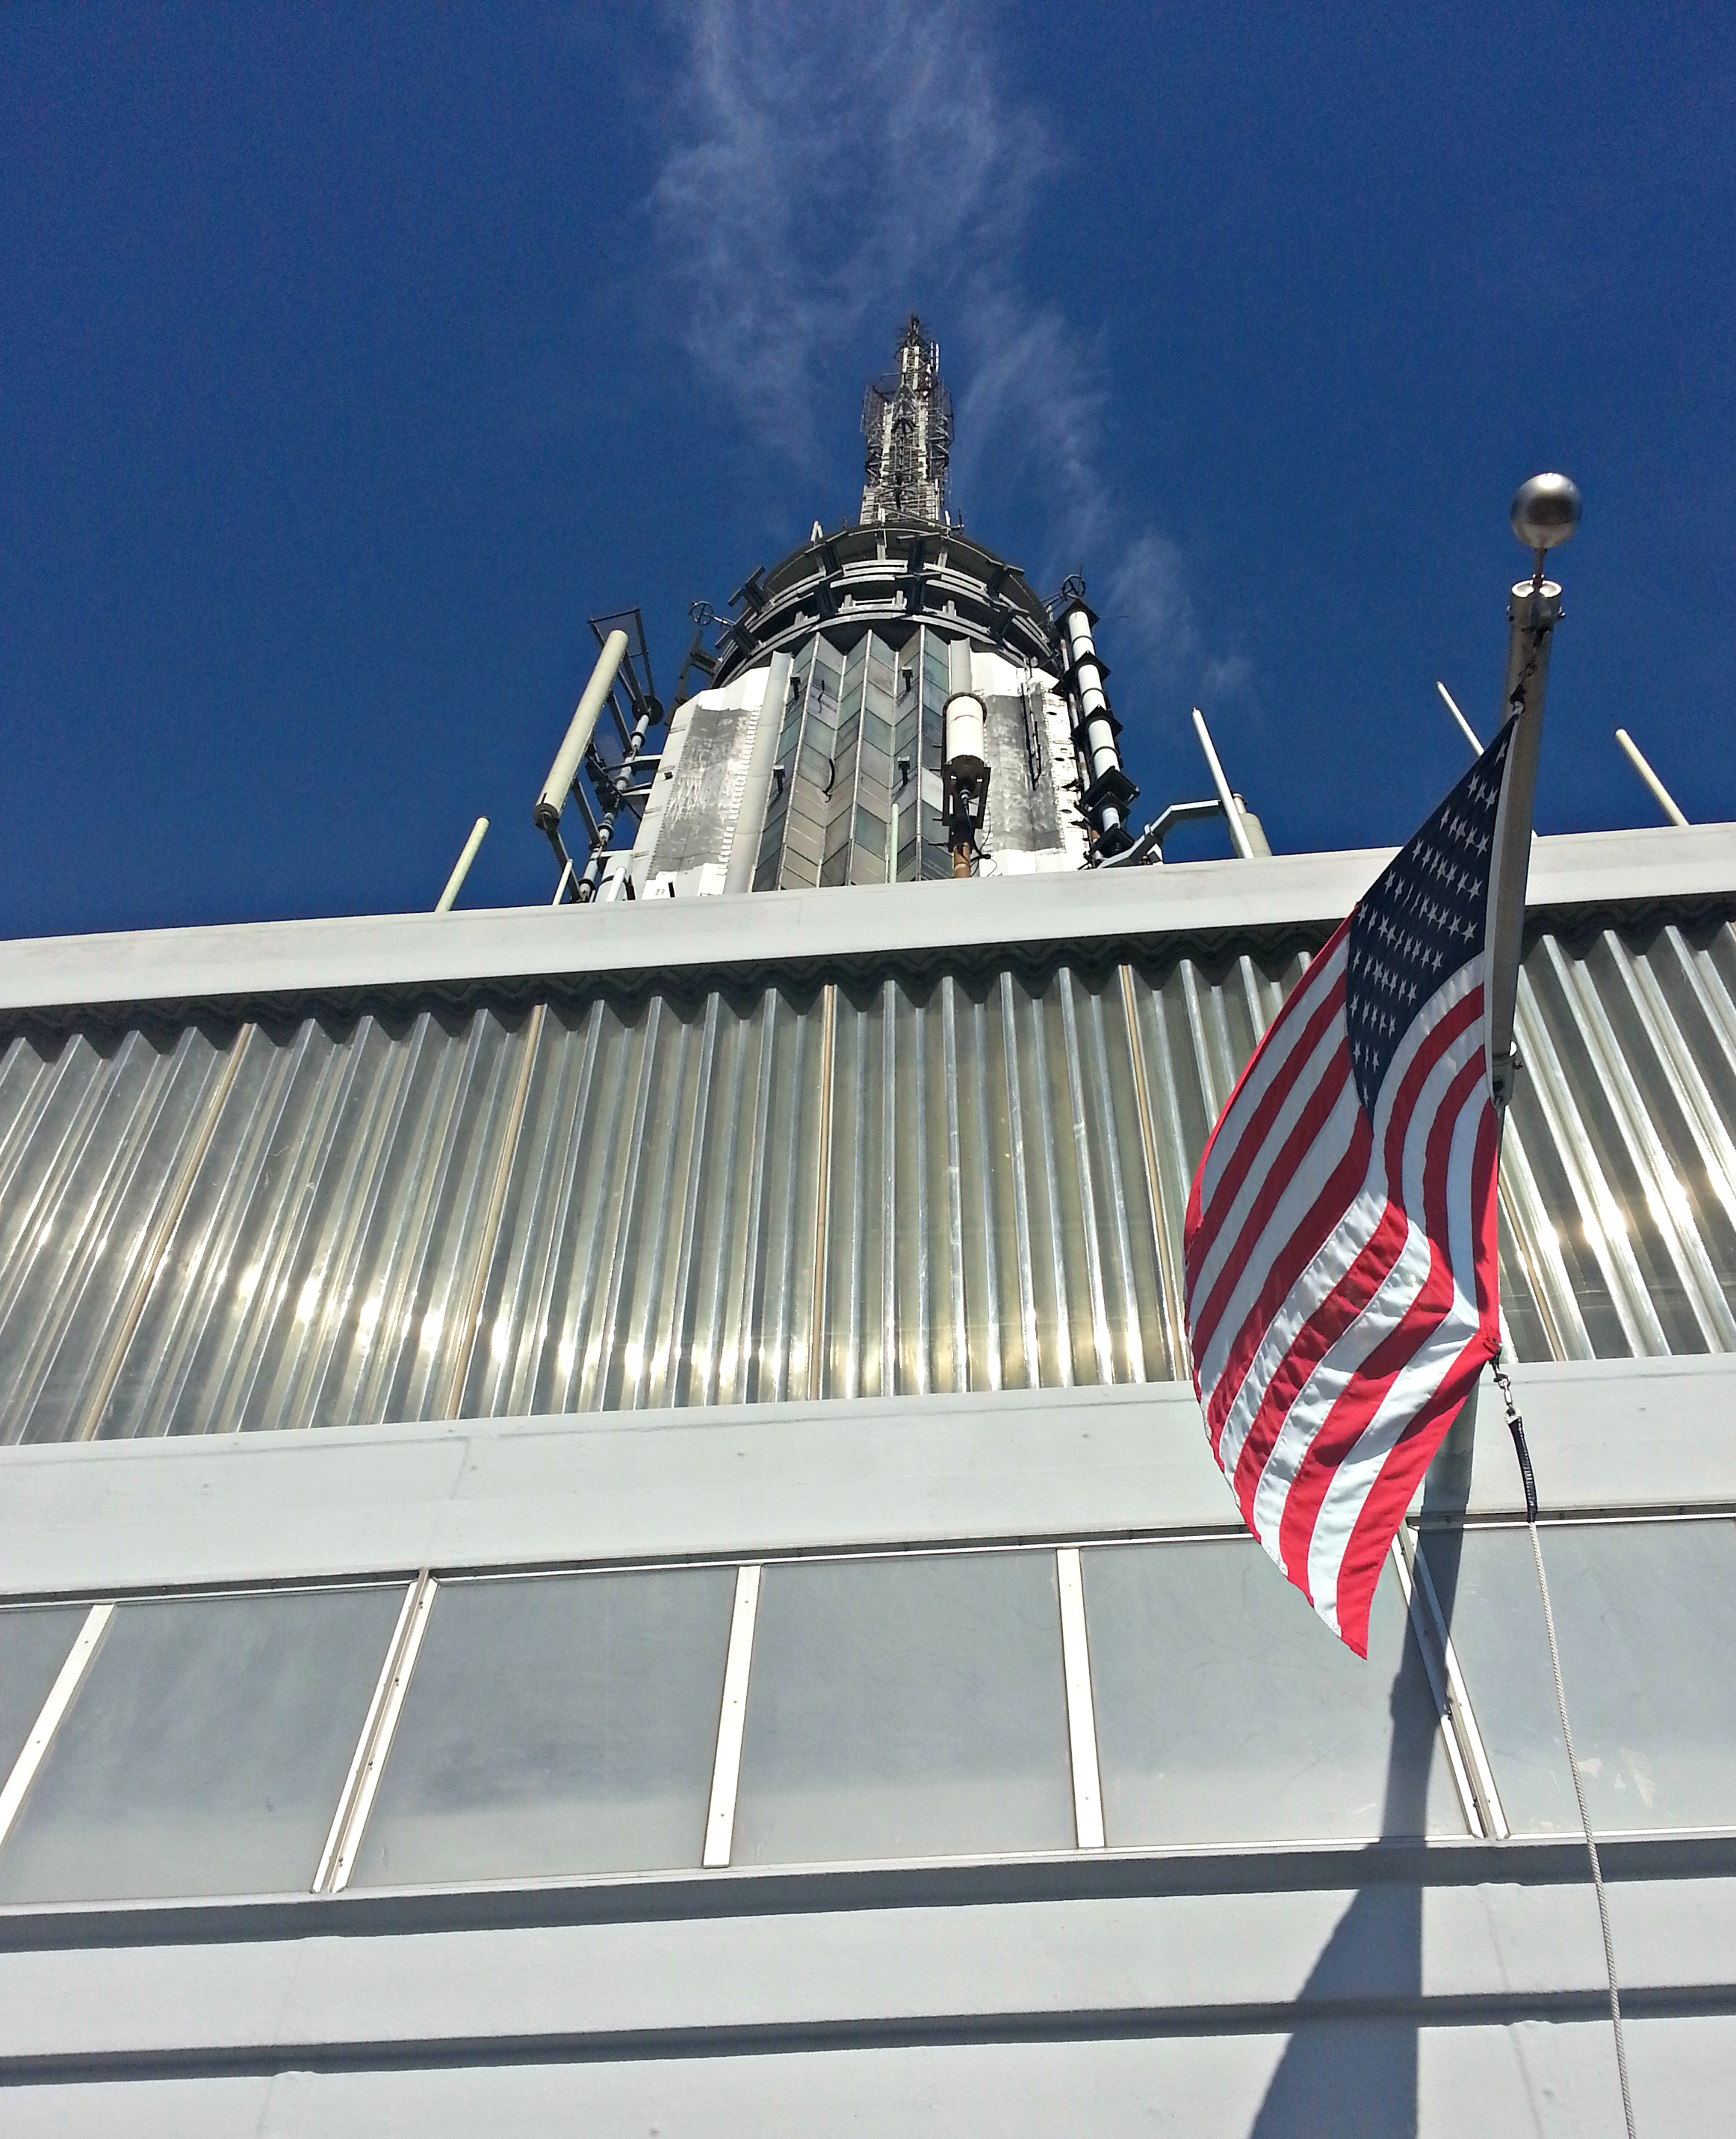 The spire of the Empire State Building